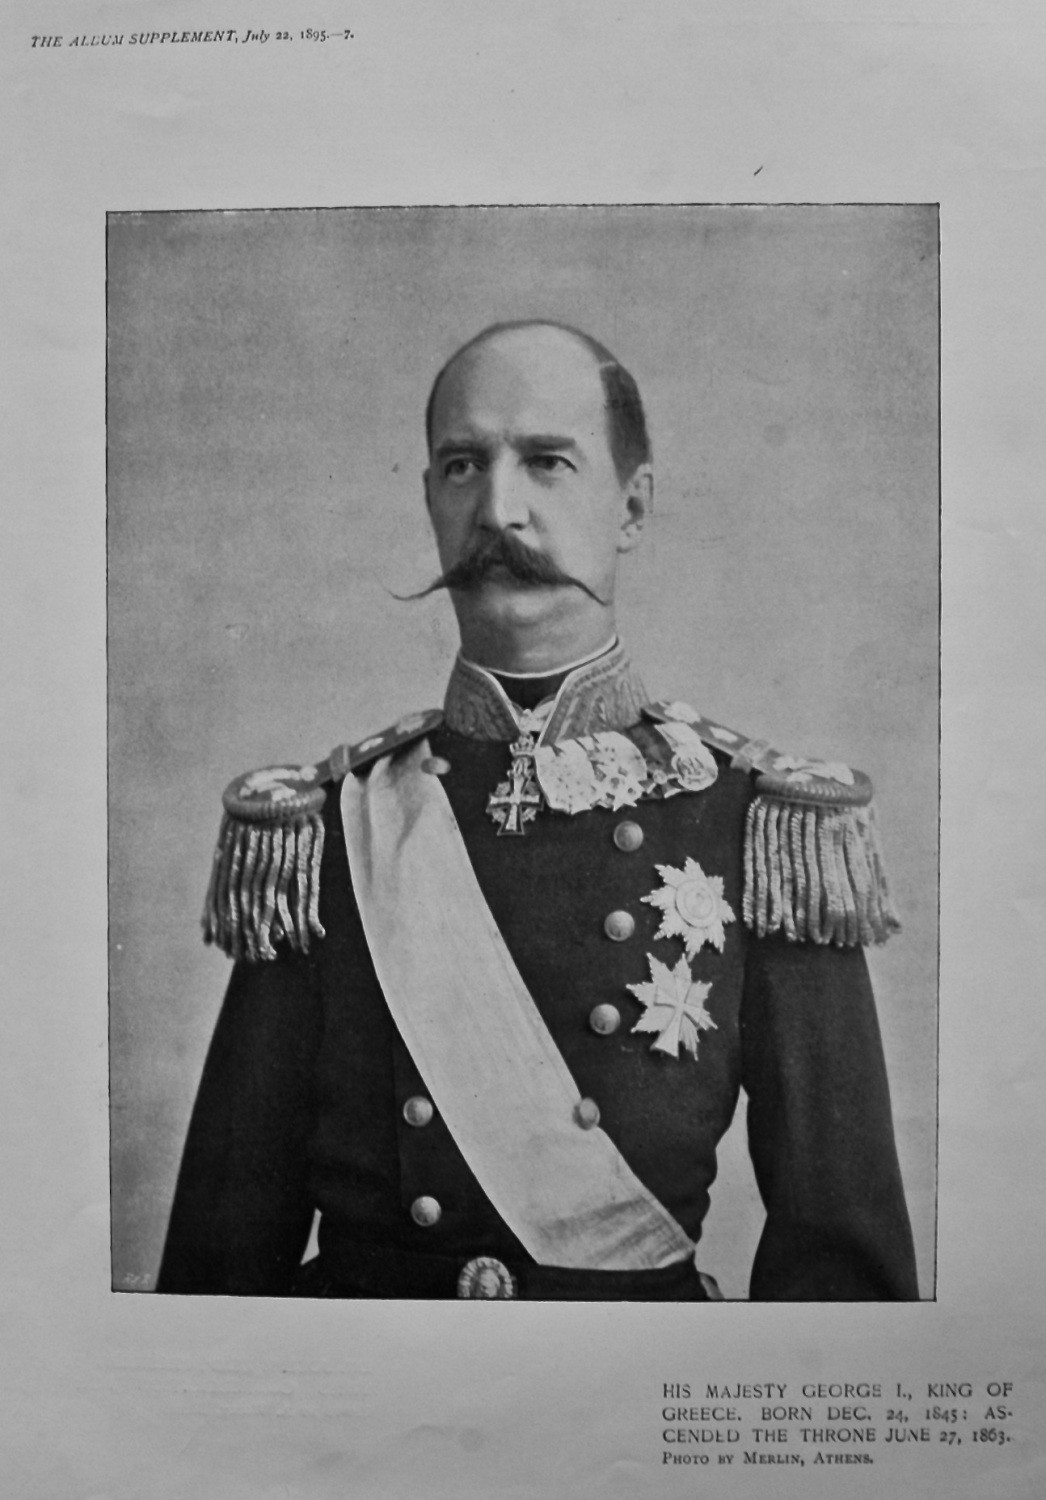 His Majesty George I., King of Greece. Born Dec. 24, 1845 : Ascended the Th